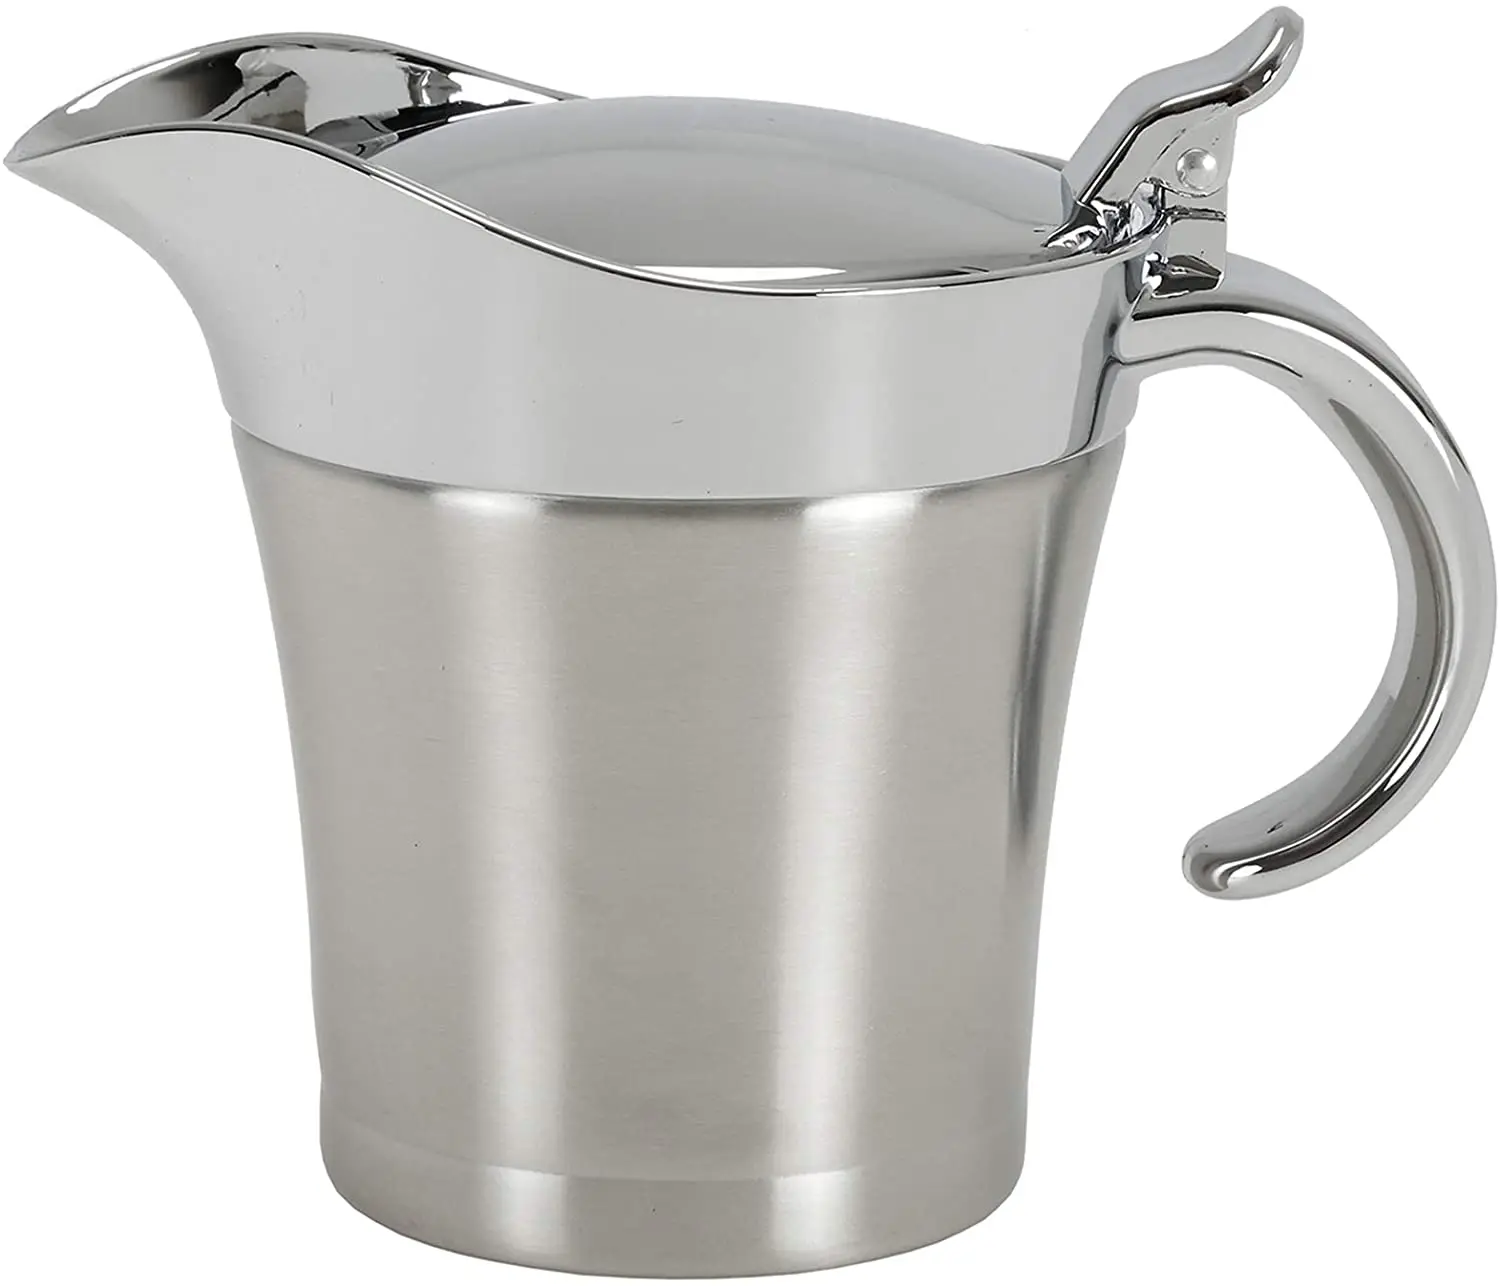 

Restaurant And Home Use Stainless Steel 480ml 750ml Capacity Meal Saucing Pot Double Wall Gravy Boat Sauce Jug, True